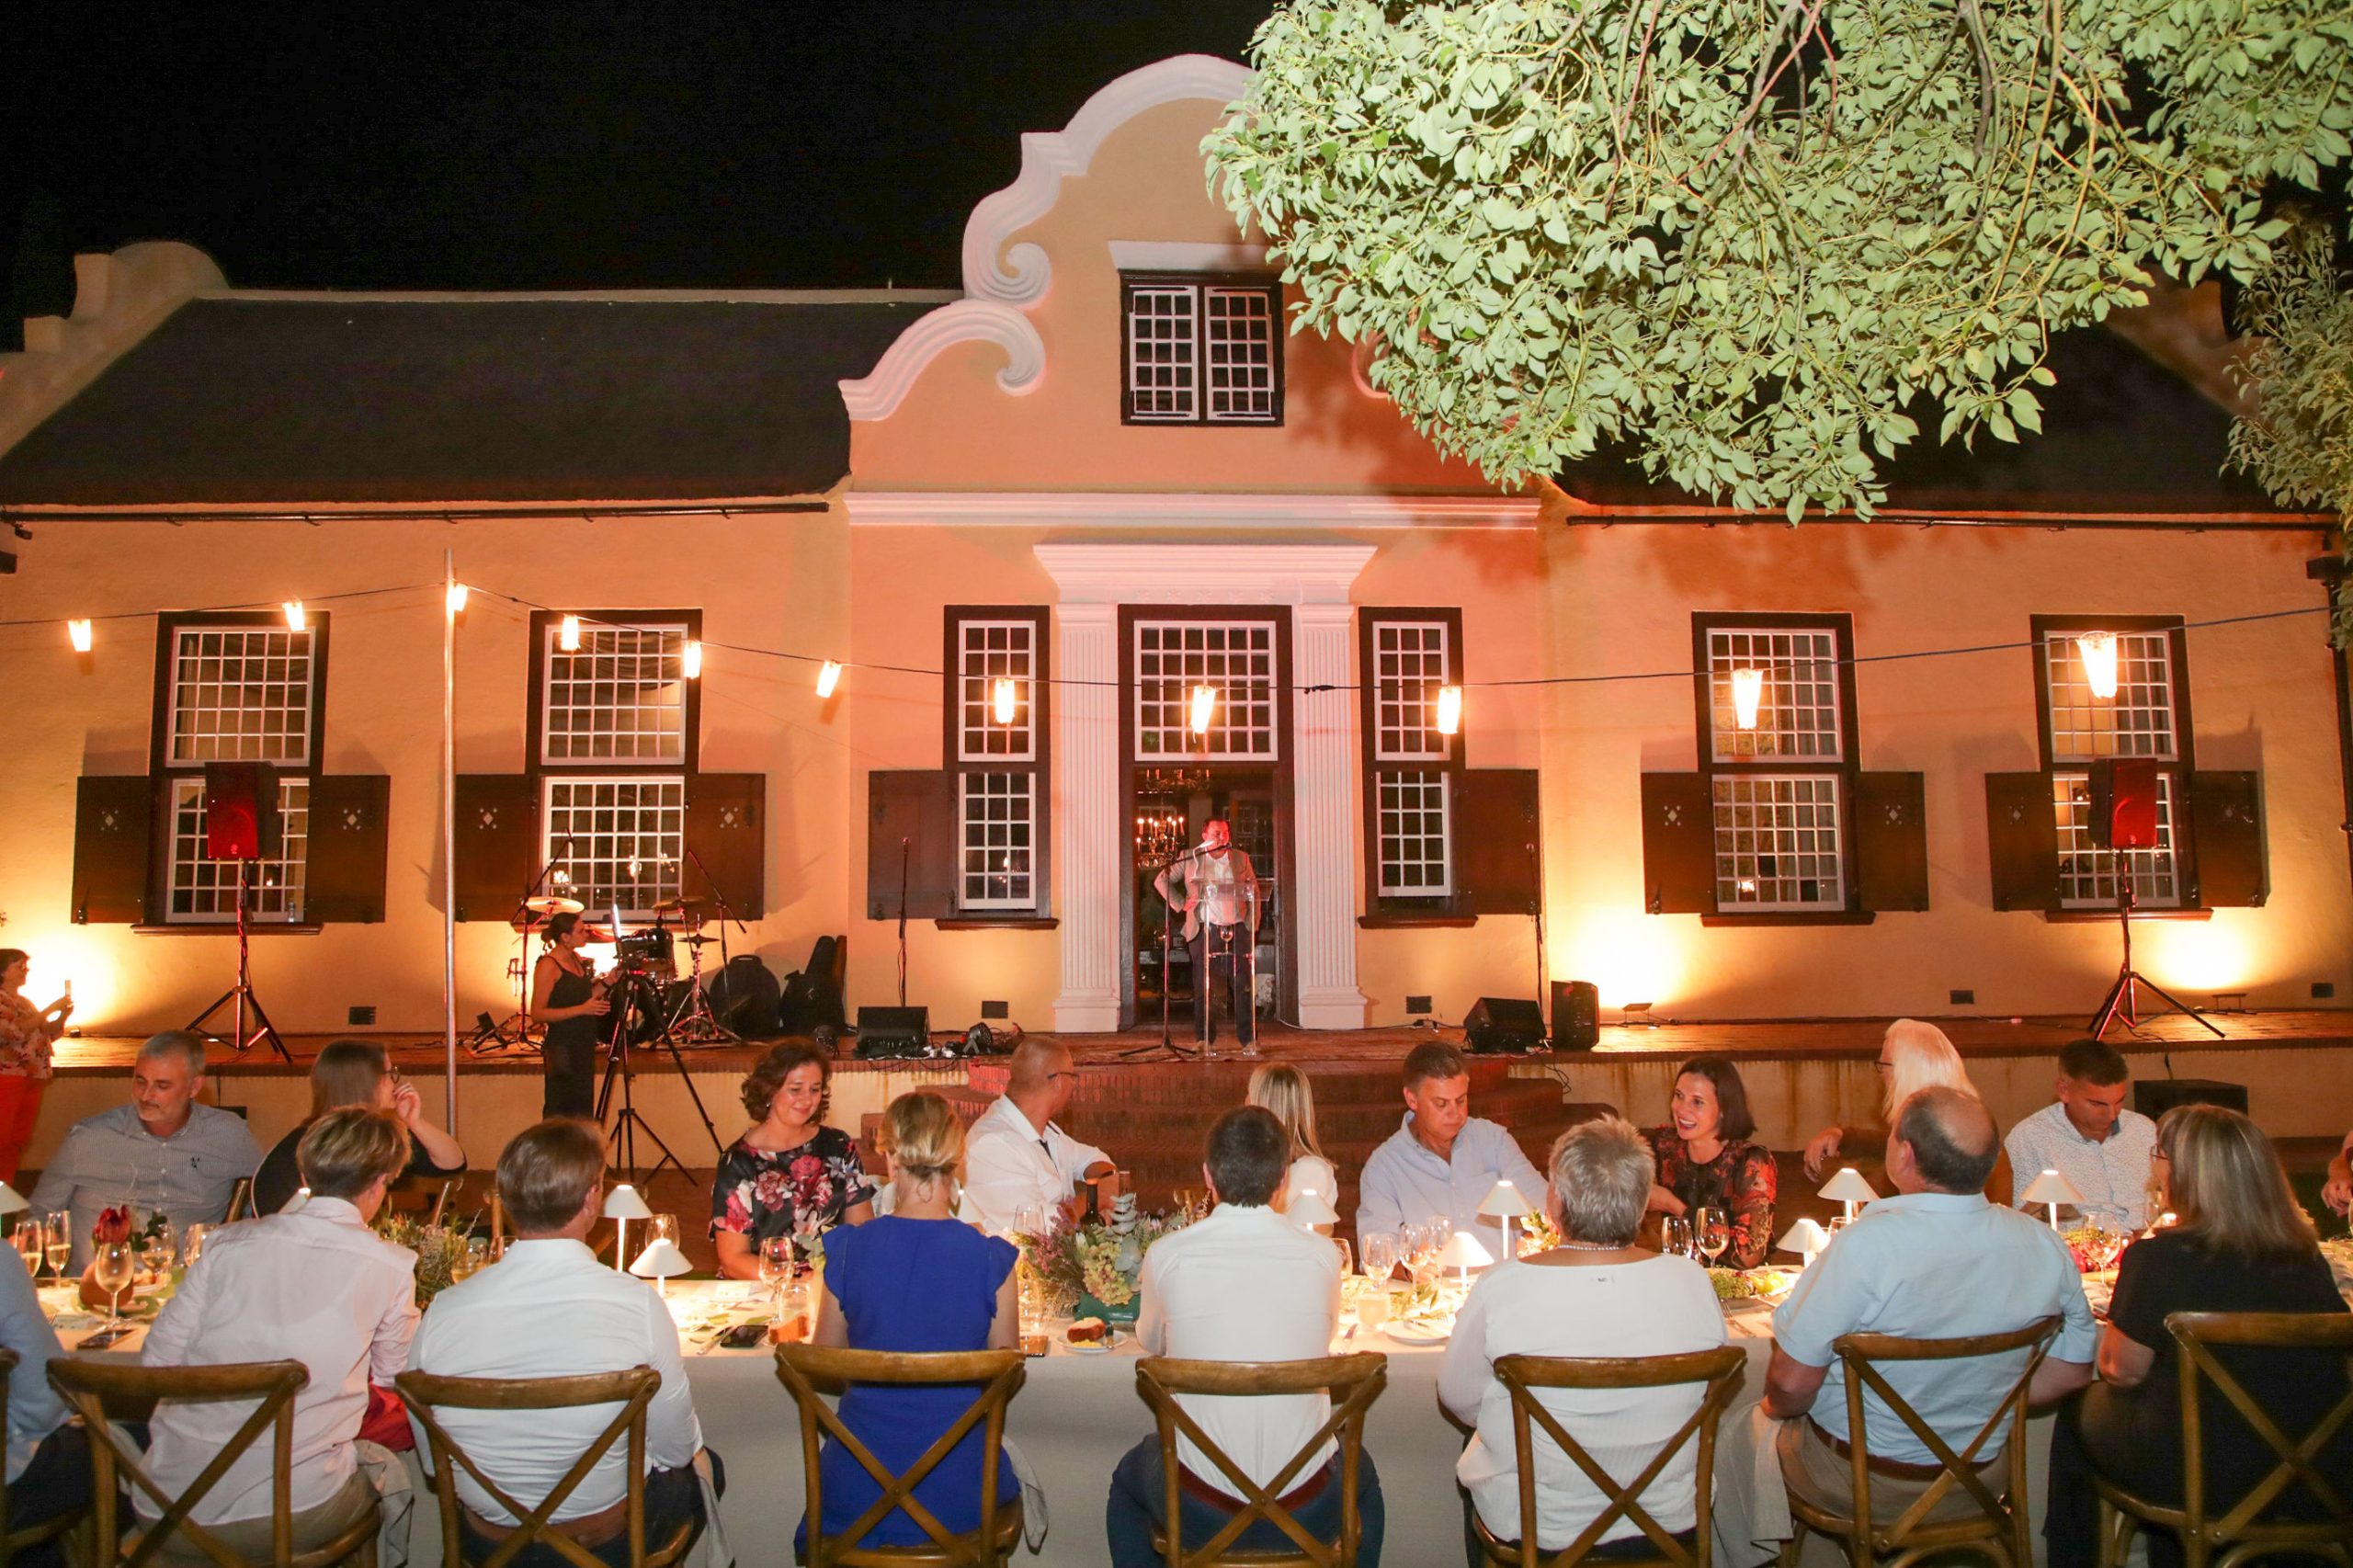 Wine lovers are entertained at a long table in front of Vergelegen’s historic homestead. Photo: A Gorman Photography